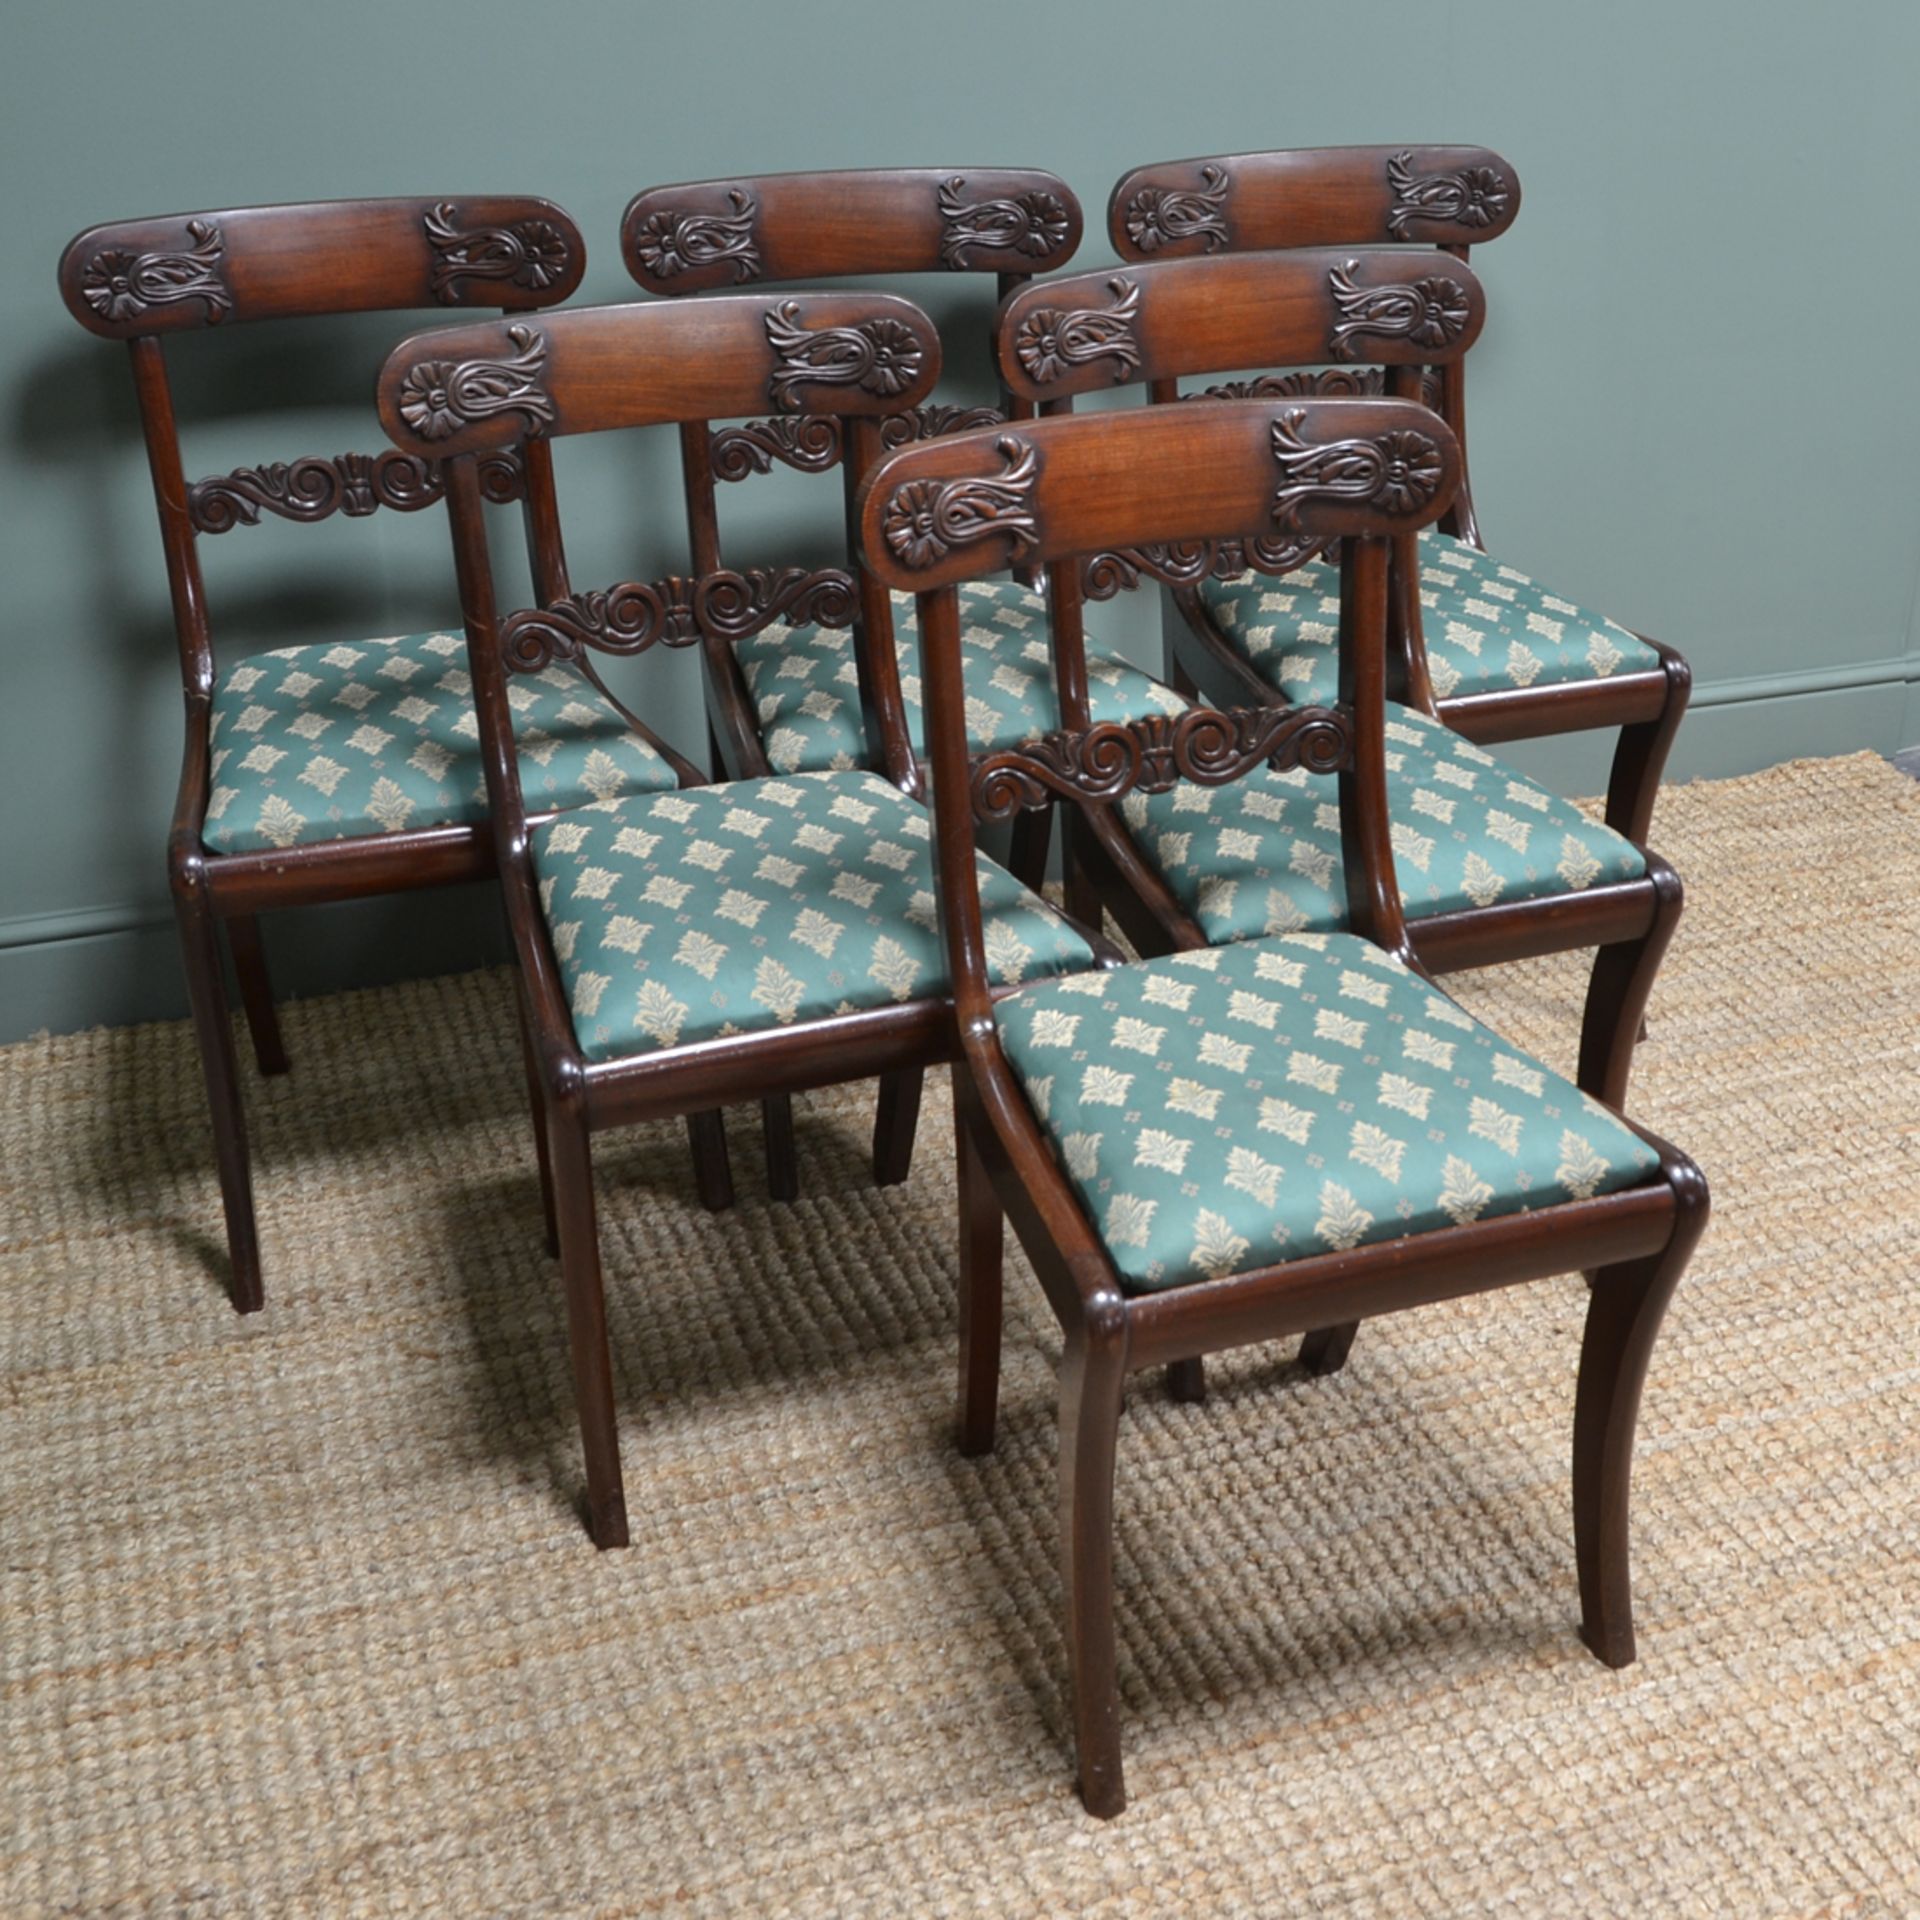 Set of Six 19th Century Double Sabre Leg Mahogany Antique Dining Chairs - Image 9 of 10